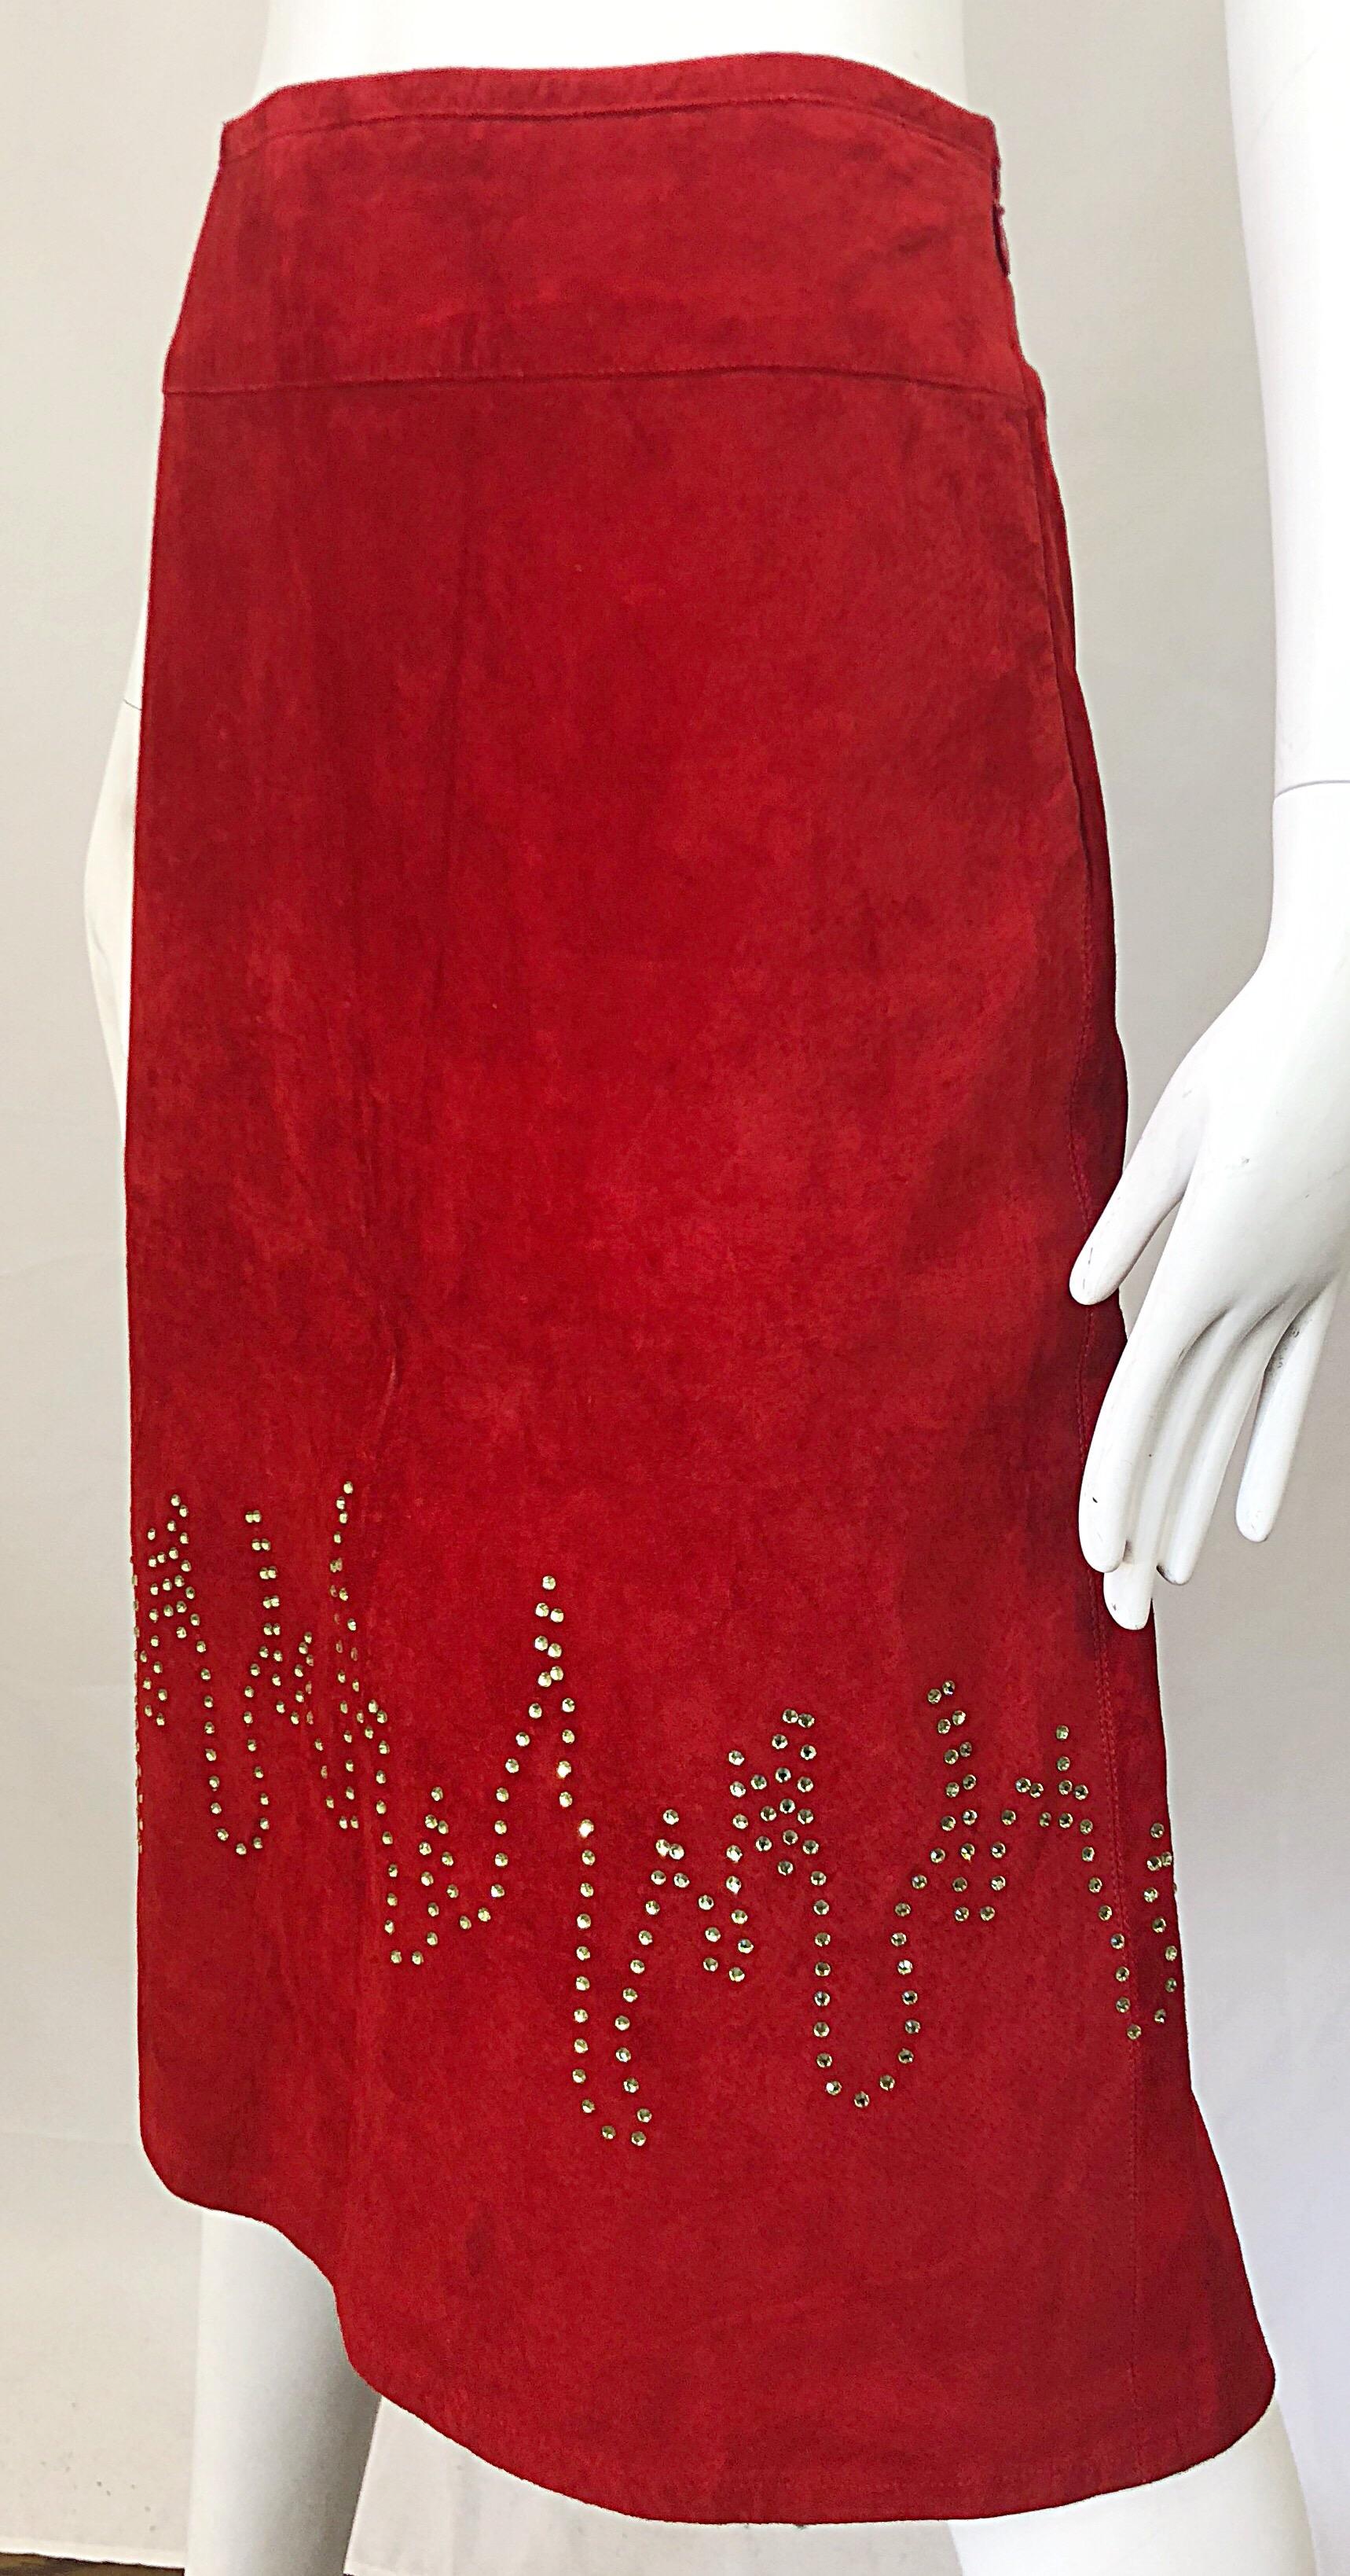 1990s Fire Engine Red Suede Leather + Rhinestones Flames Vintage Late 90s Skirt For Sale 6